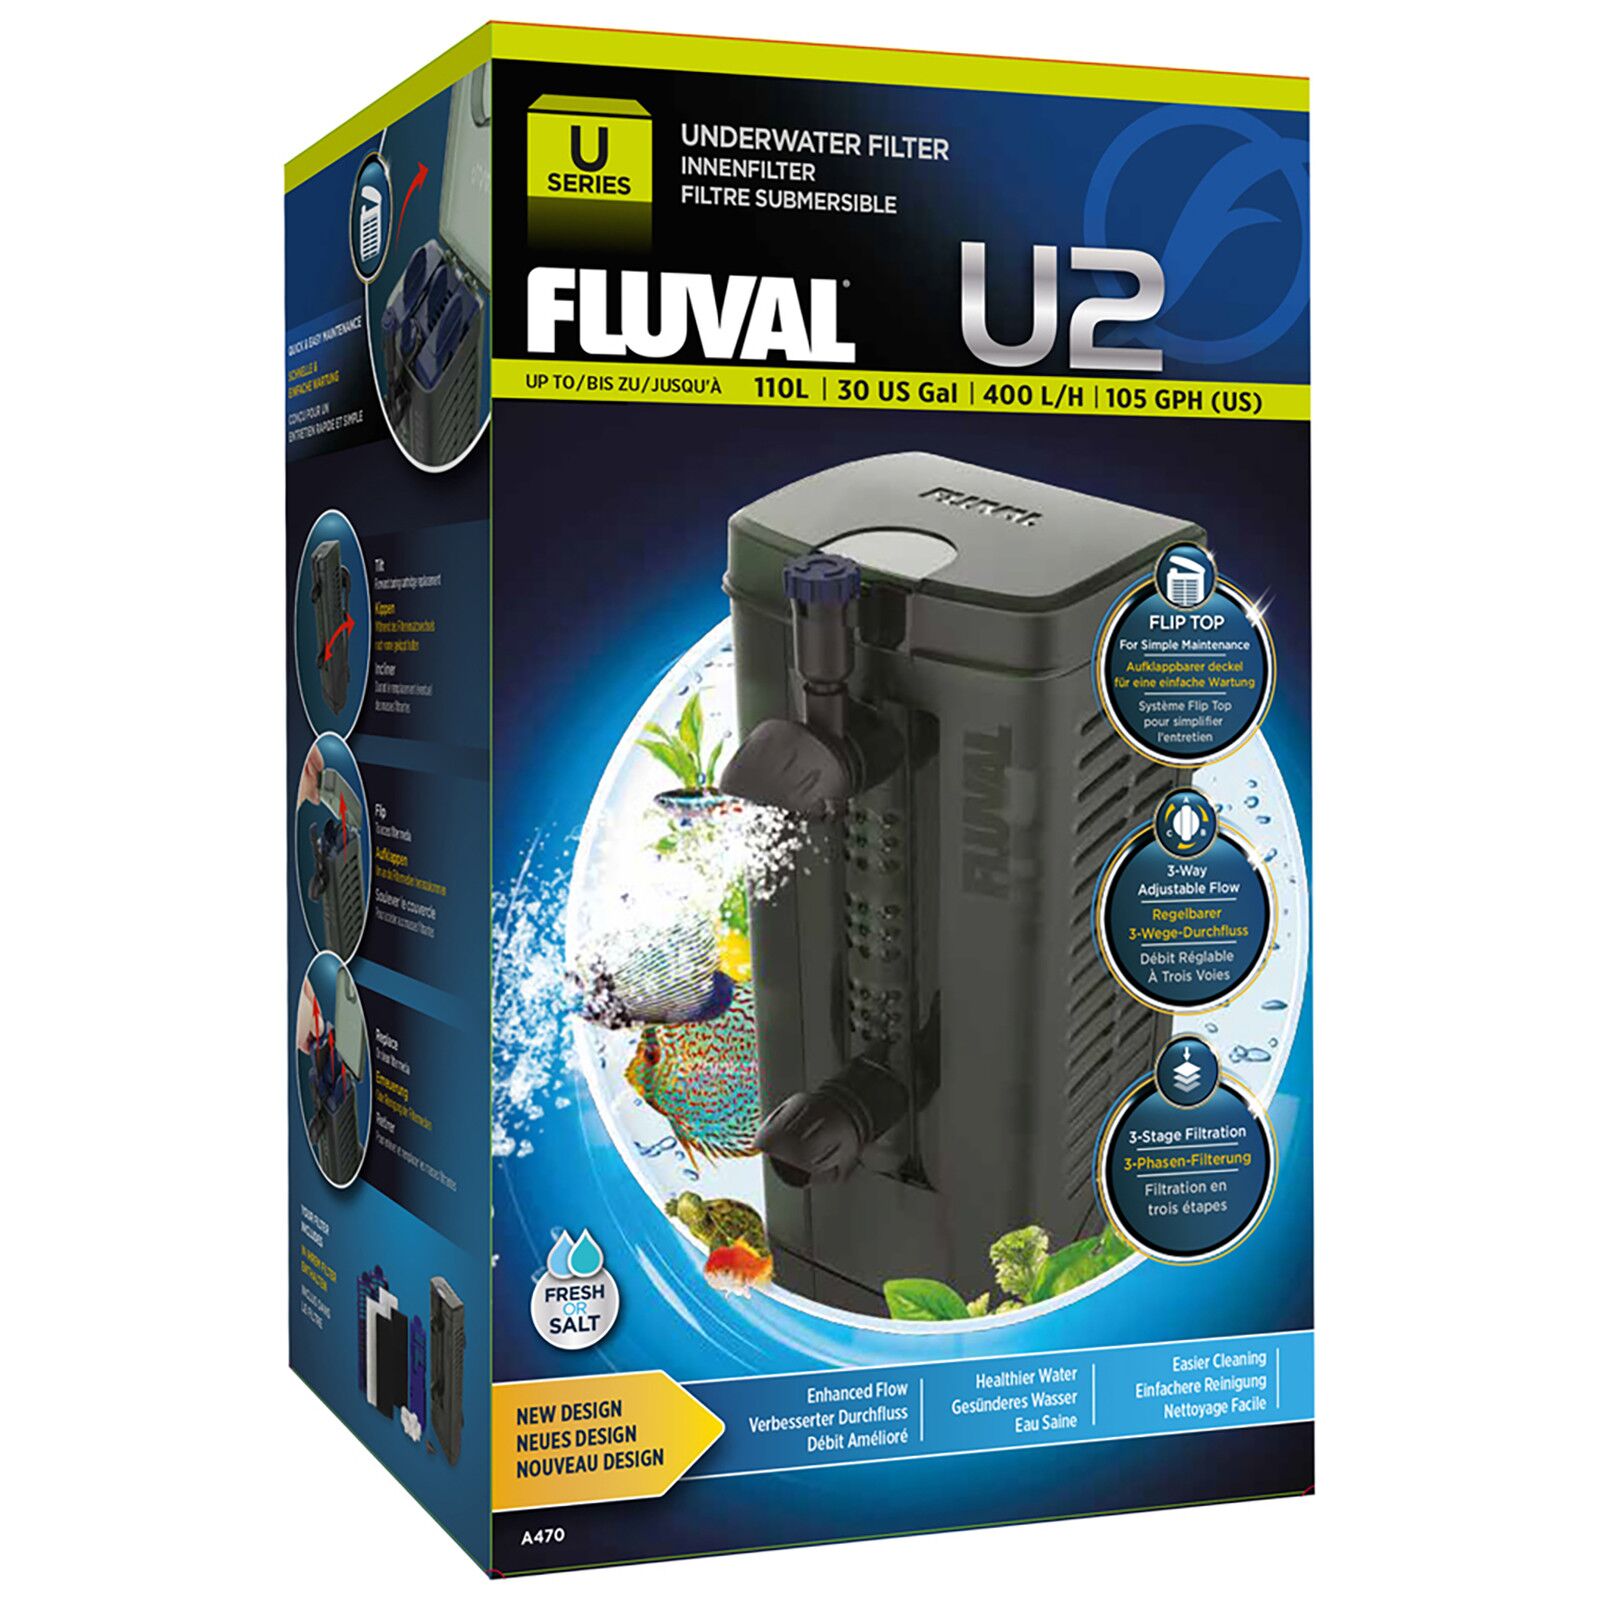 for biological and chemical filtration suitable for aquariums with 30 to 60 litres Tetra IN 400 plus internal filter